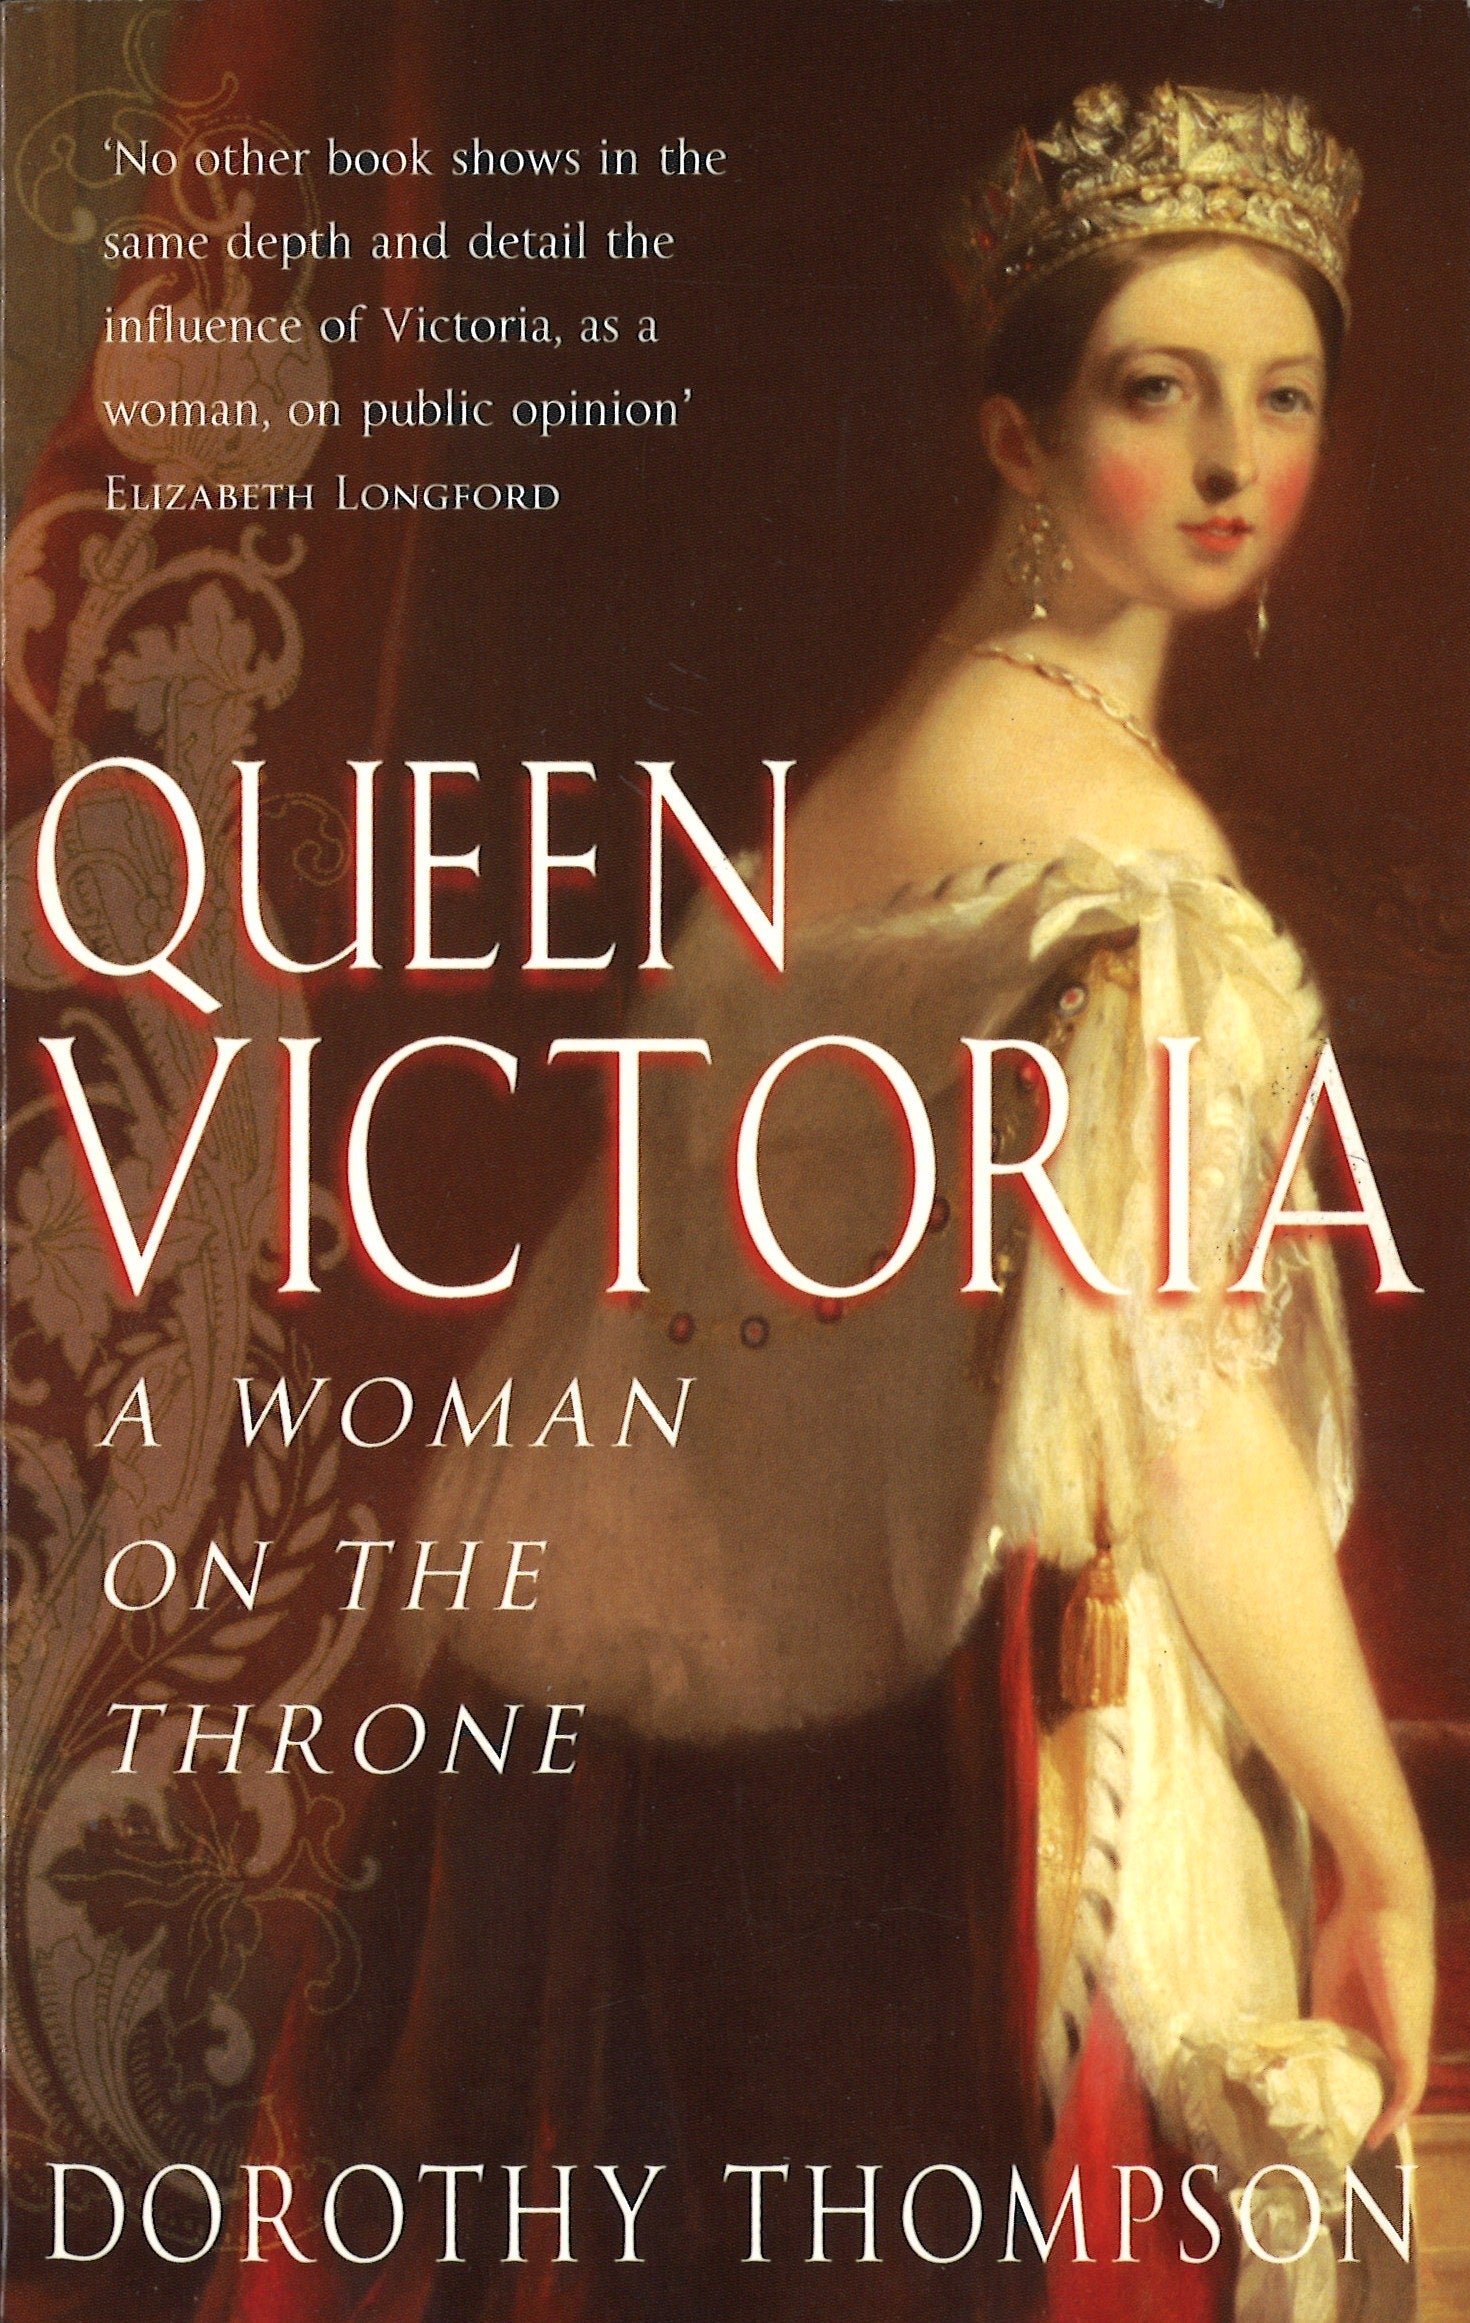 Queen Victoria by Dorothy Thompson